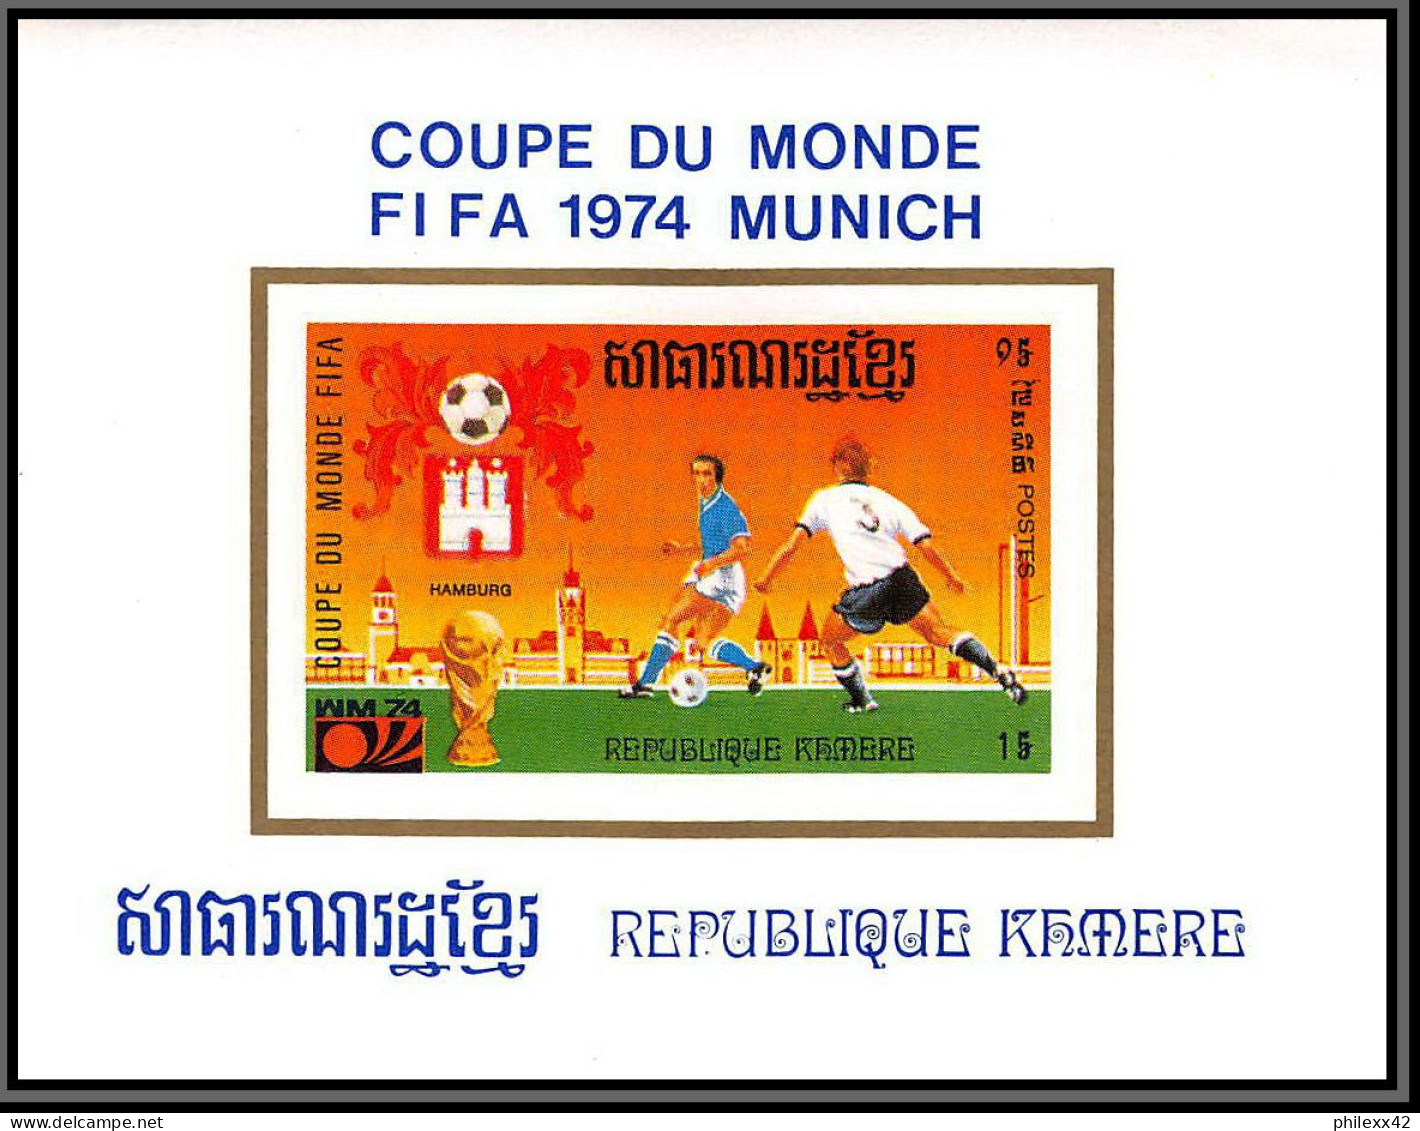 86224 Mi N°420/428 Football soccer munich wold cup 1974 deluxe miniature sheets ** MNH khmère Cambodia cambodge